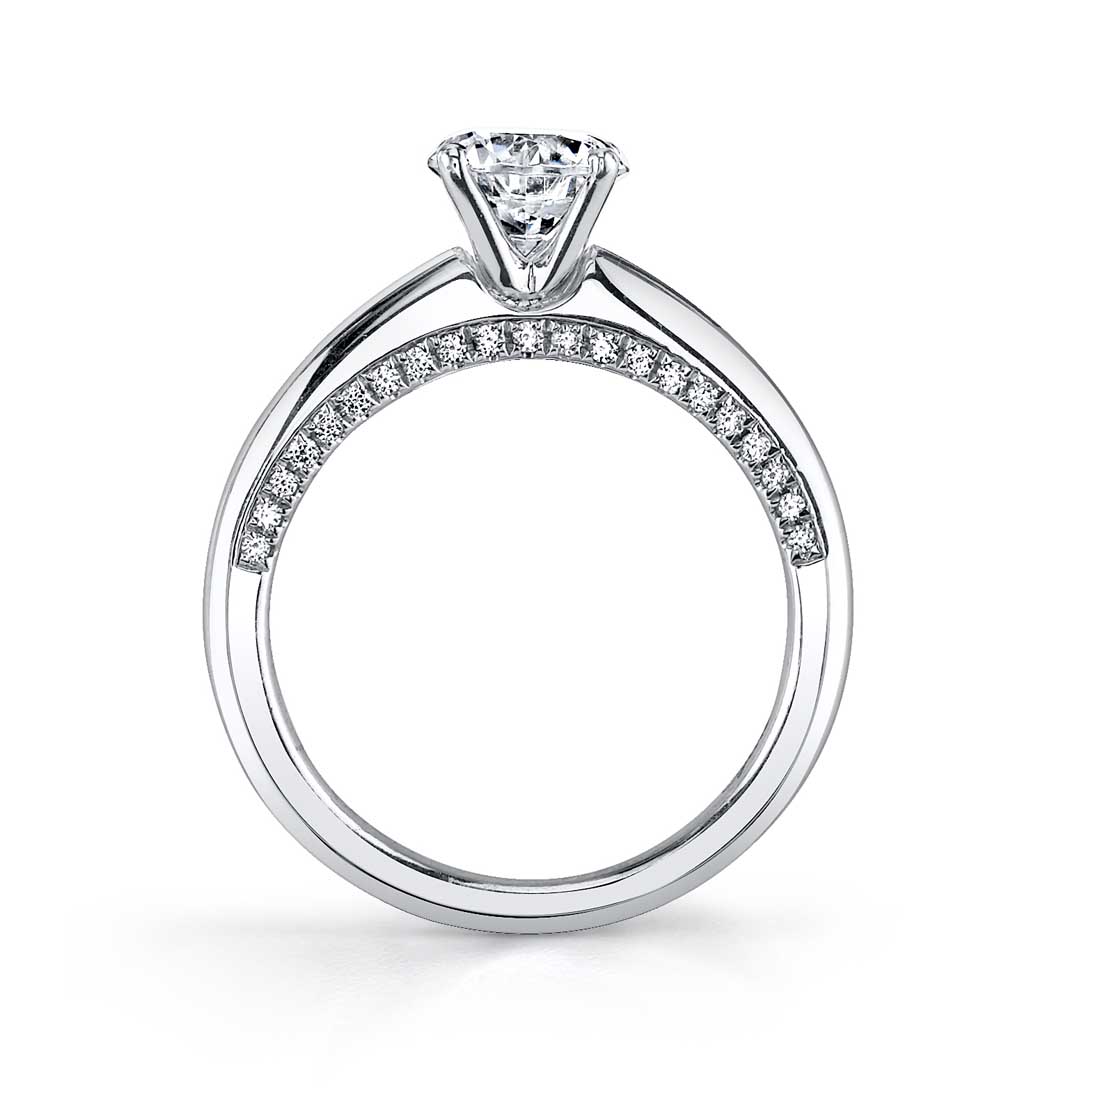 Profile Image of a Solitaire Engagement Ring